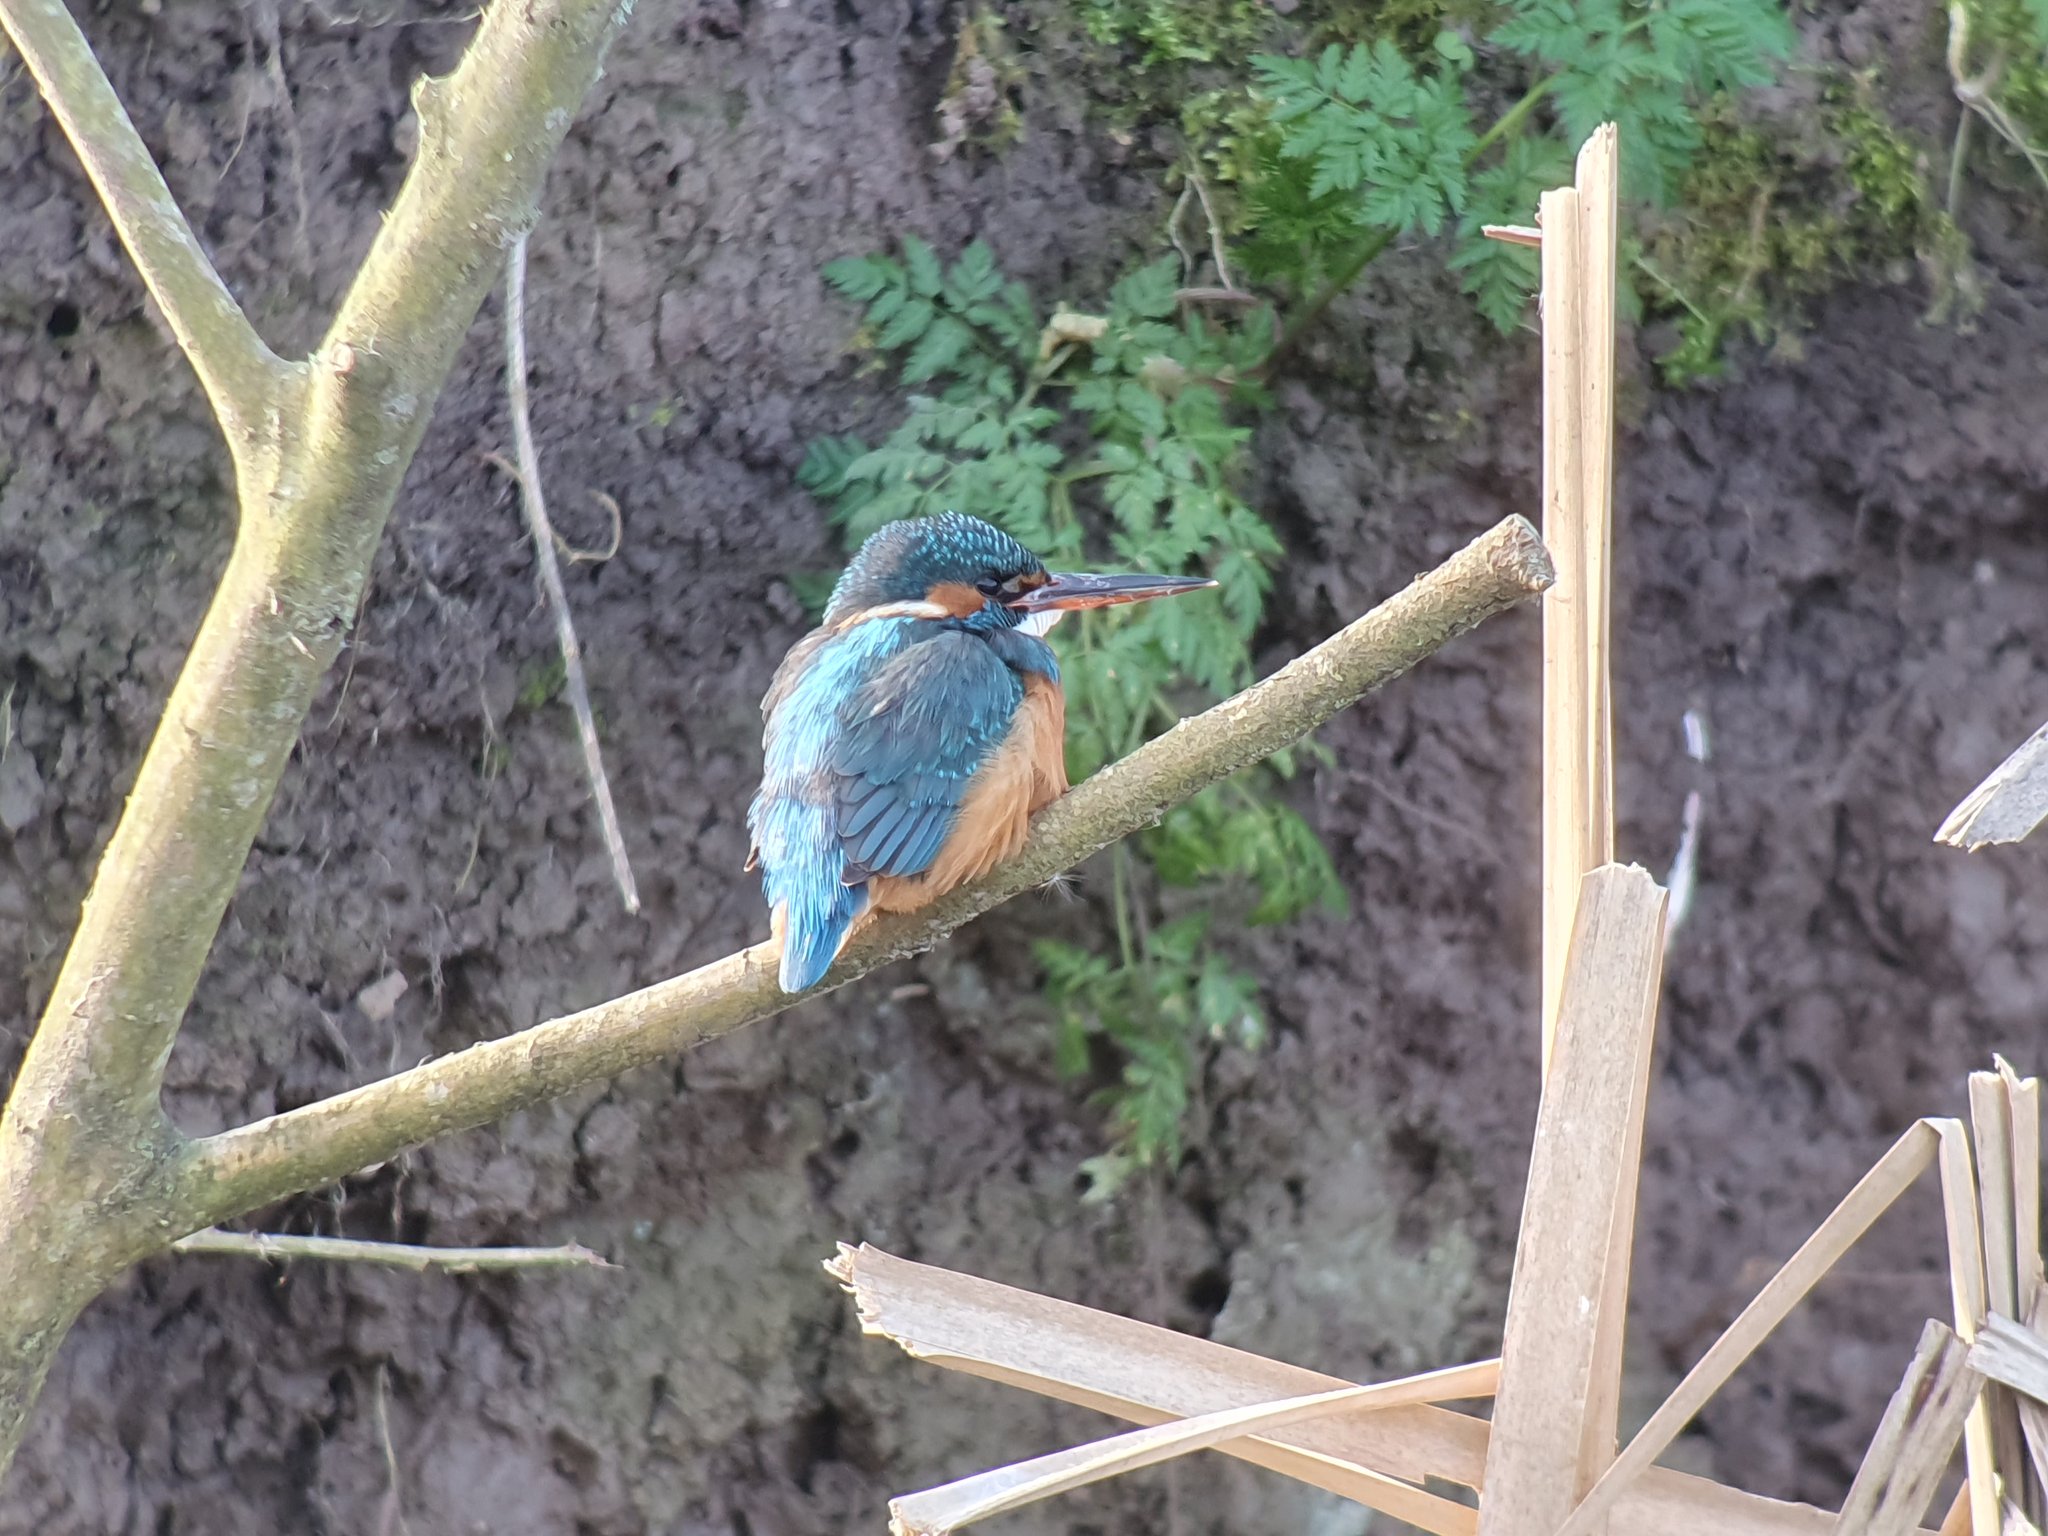 Kingfishers hatch young at the South Finger